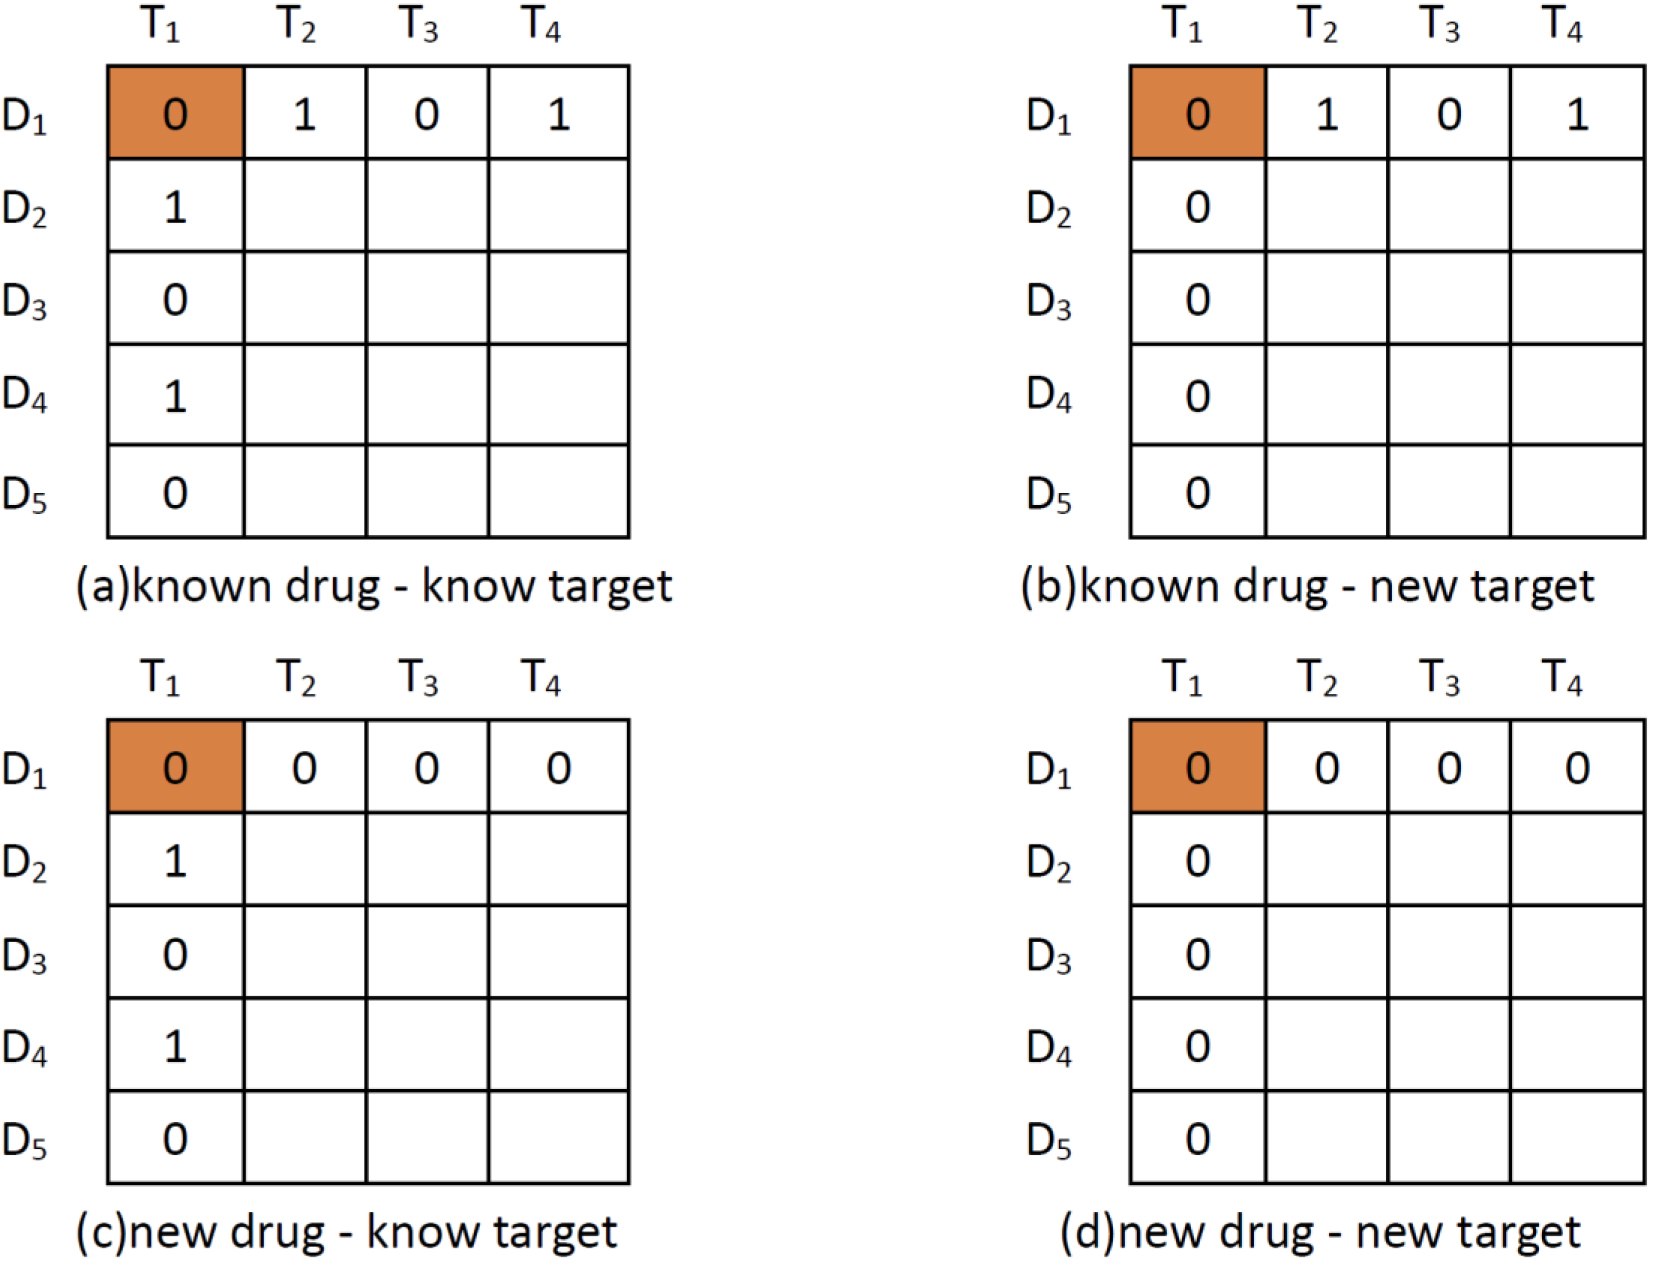 Four scenarios of DTI predictions. The pair with orange background represents (a) known drug-known target; (b) known drug-new target; (c) new drug-known target; and (d) new drug-new target.